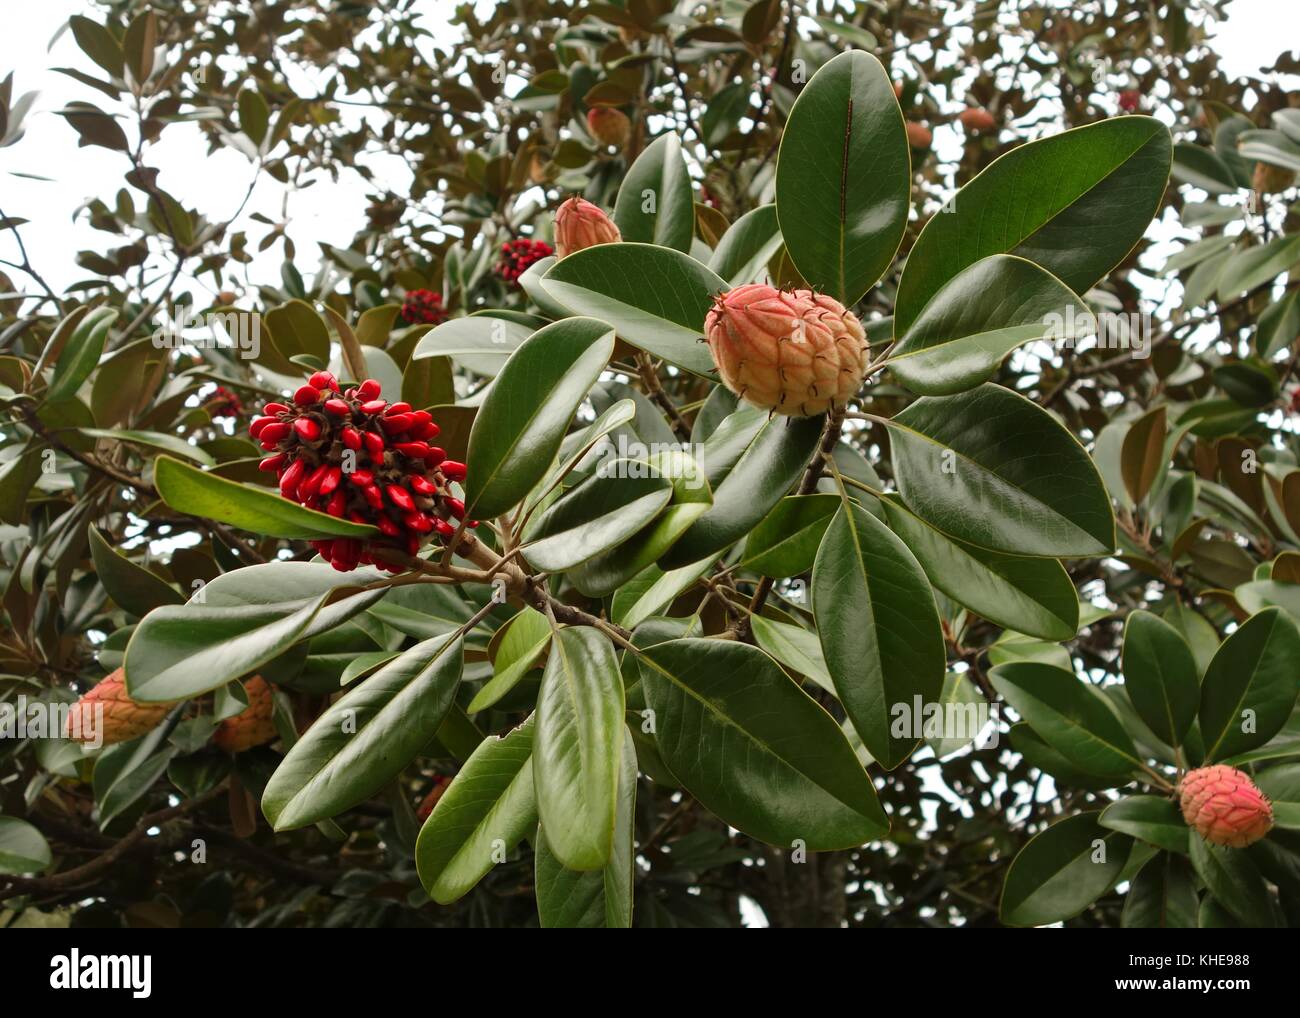 Magnolia tree leaves, seed pods and red seeds in Florida, USA Stock Photo